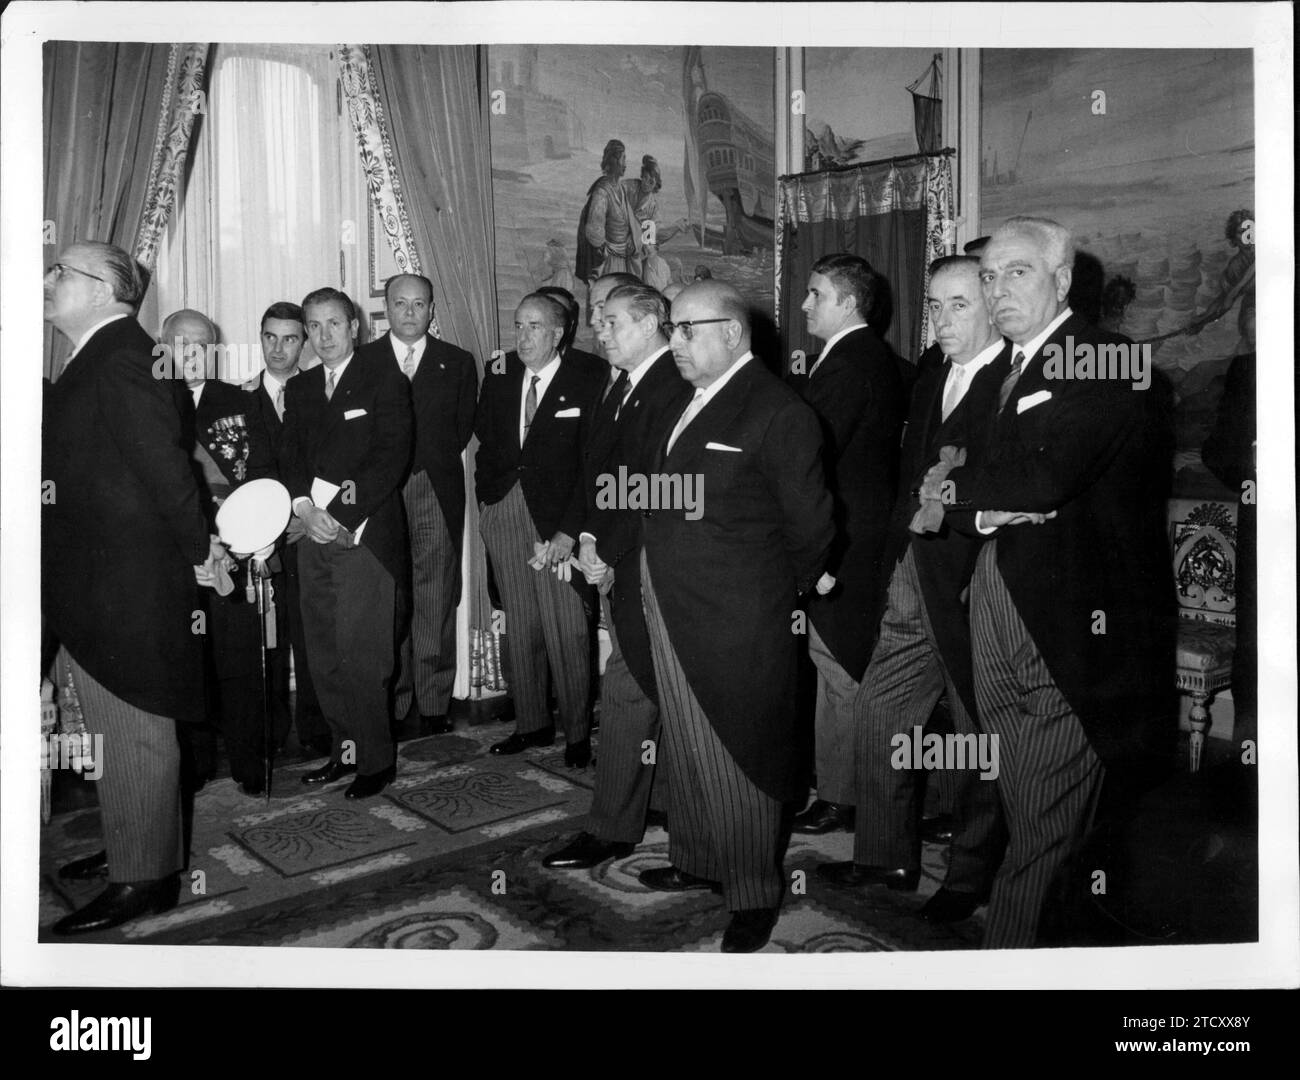 02/14/1967. The V Nautical Show. Audience of the head of state in the El Pardo palace to the organizing committee of the V International Boat Show of Barcelona, chaired by the national delegate of physical education and sports, Mr. Samaranch and the general director of commercial expansion. Credit: Album / Archivo ABC / Manuel Sanz Bermejo Stock Photo